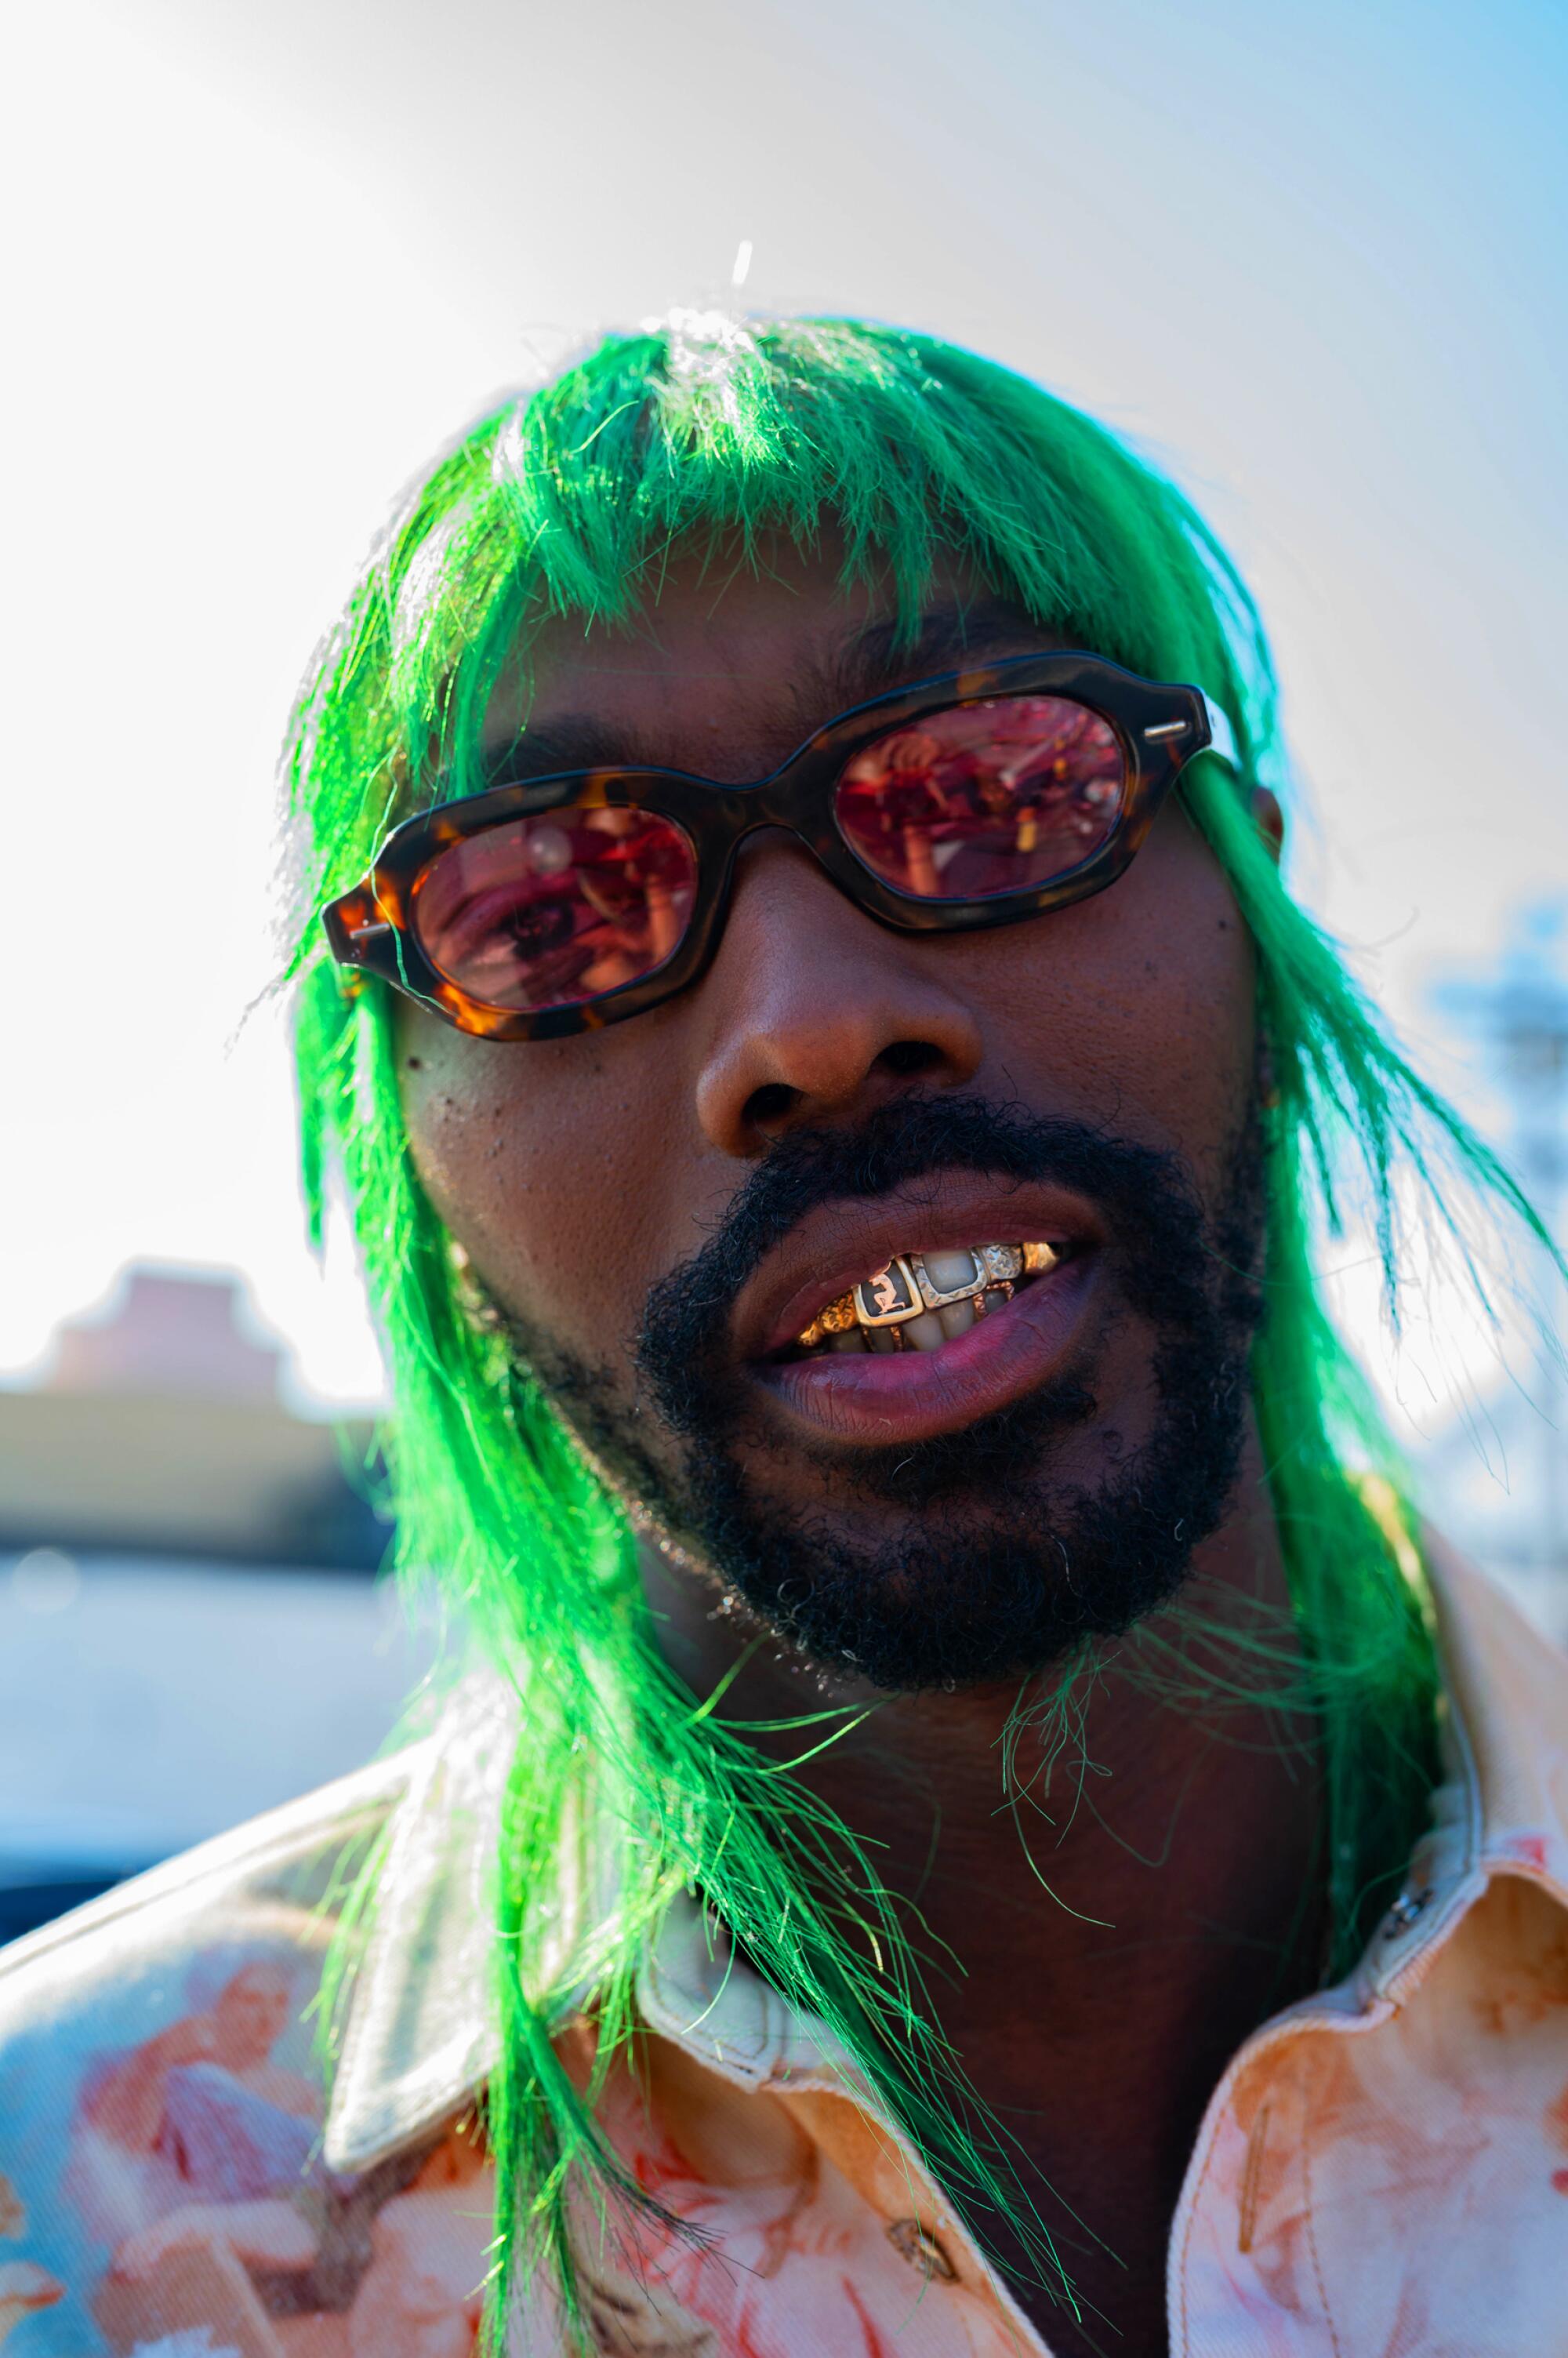 A person, wearing green hair and sunglasses, smiles.